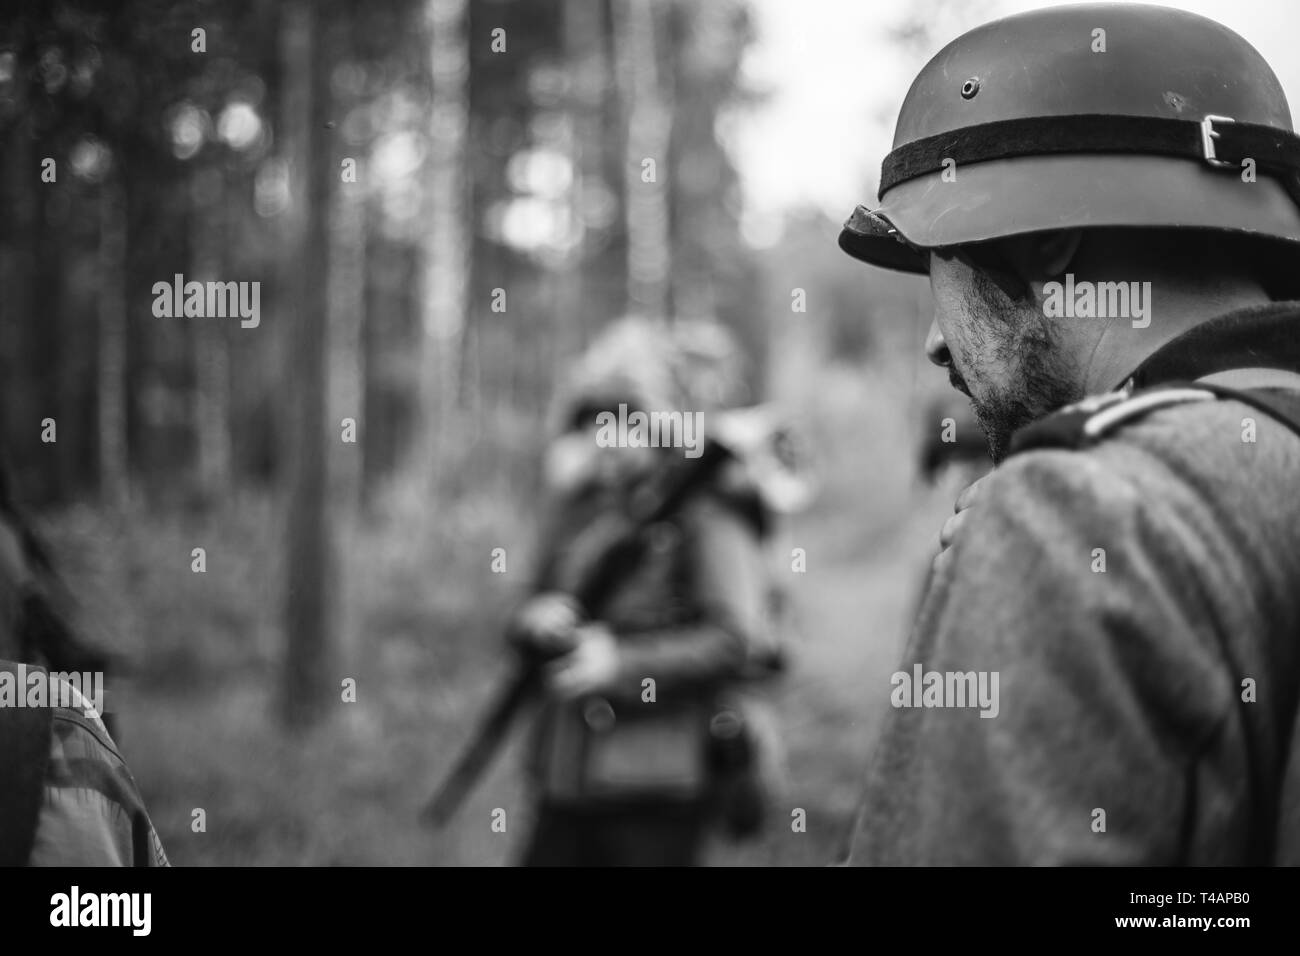 Re-enactors Dressed As World War II German Wehrmacht Soldiers Marching Walking Along Forest Road In Summer Day. Photo In Black And White Colors. Milit Stock Photo